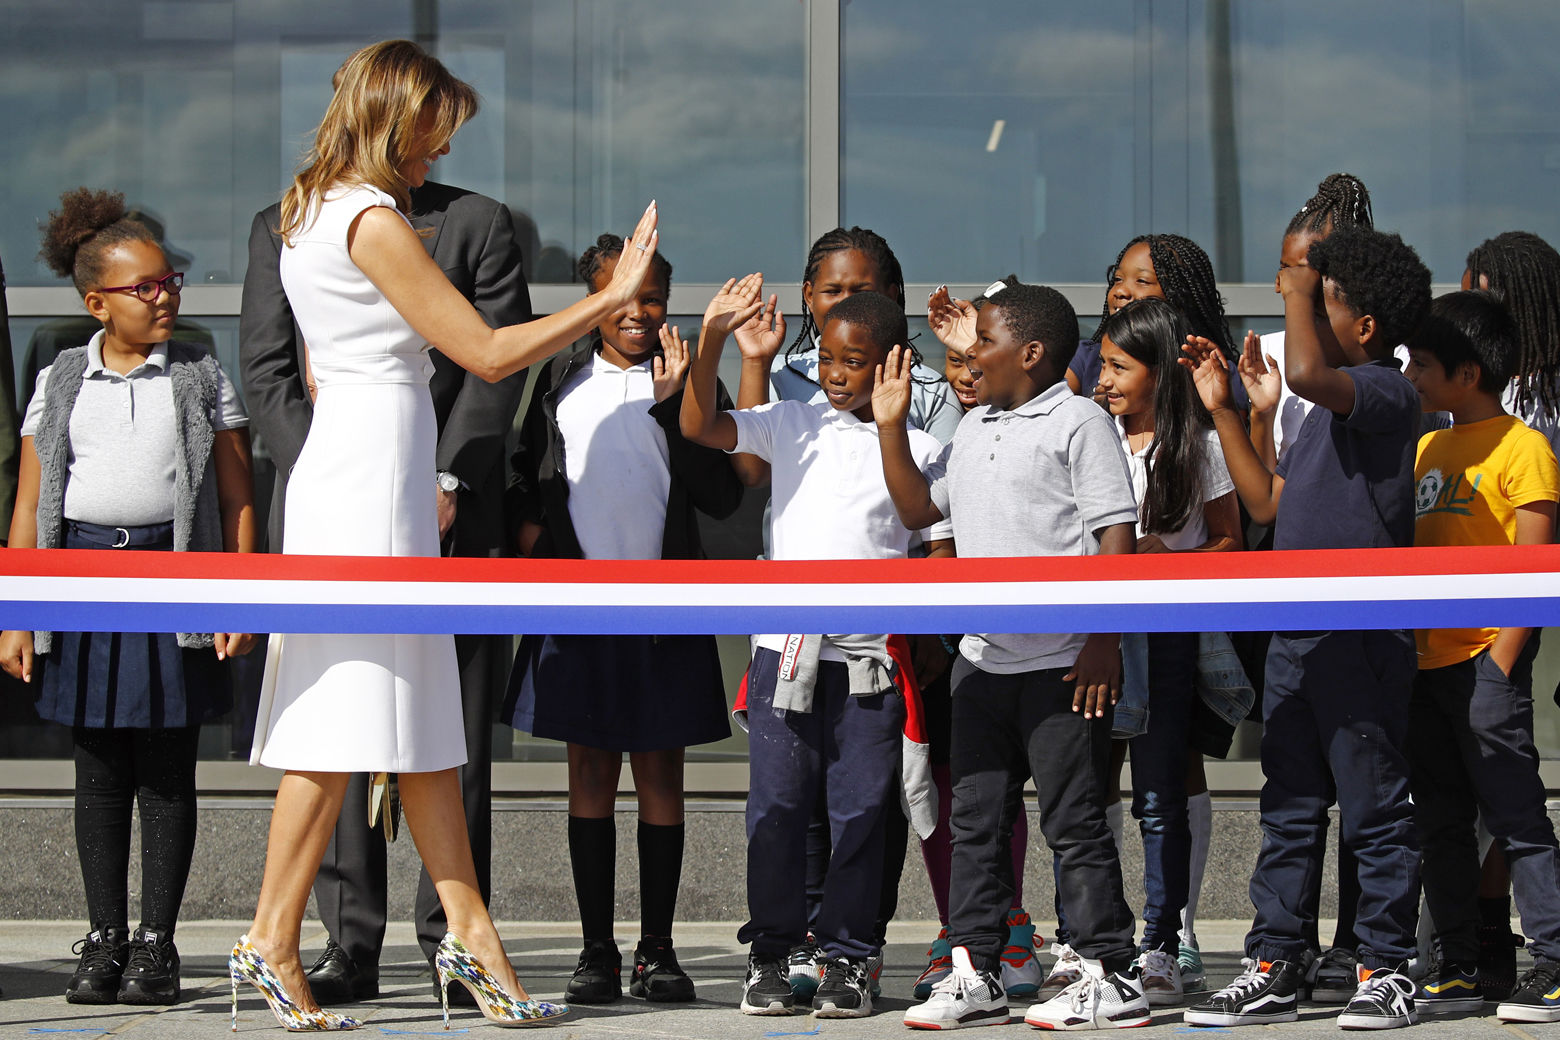 First lady Melania Trump high-fives students from Amidon-Bowen Elementary School in Washington as she arrives at a ribbon-cutting ceremony to re-open the Washington Monument, Thursday, Sept. 19, 2019, in Washington. The monument has been closed to the public for renovations since August 2016. (AP Photo/Patrick Semansky)